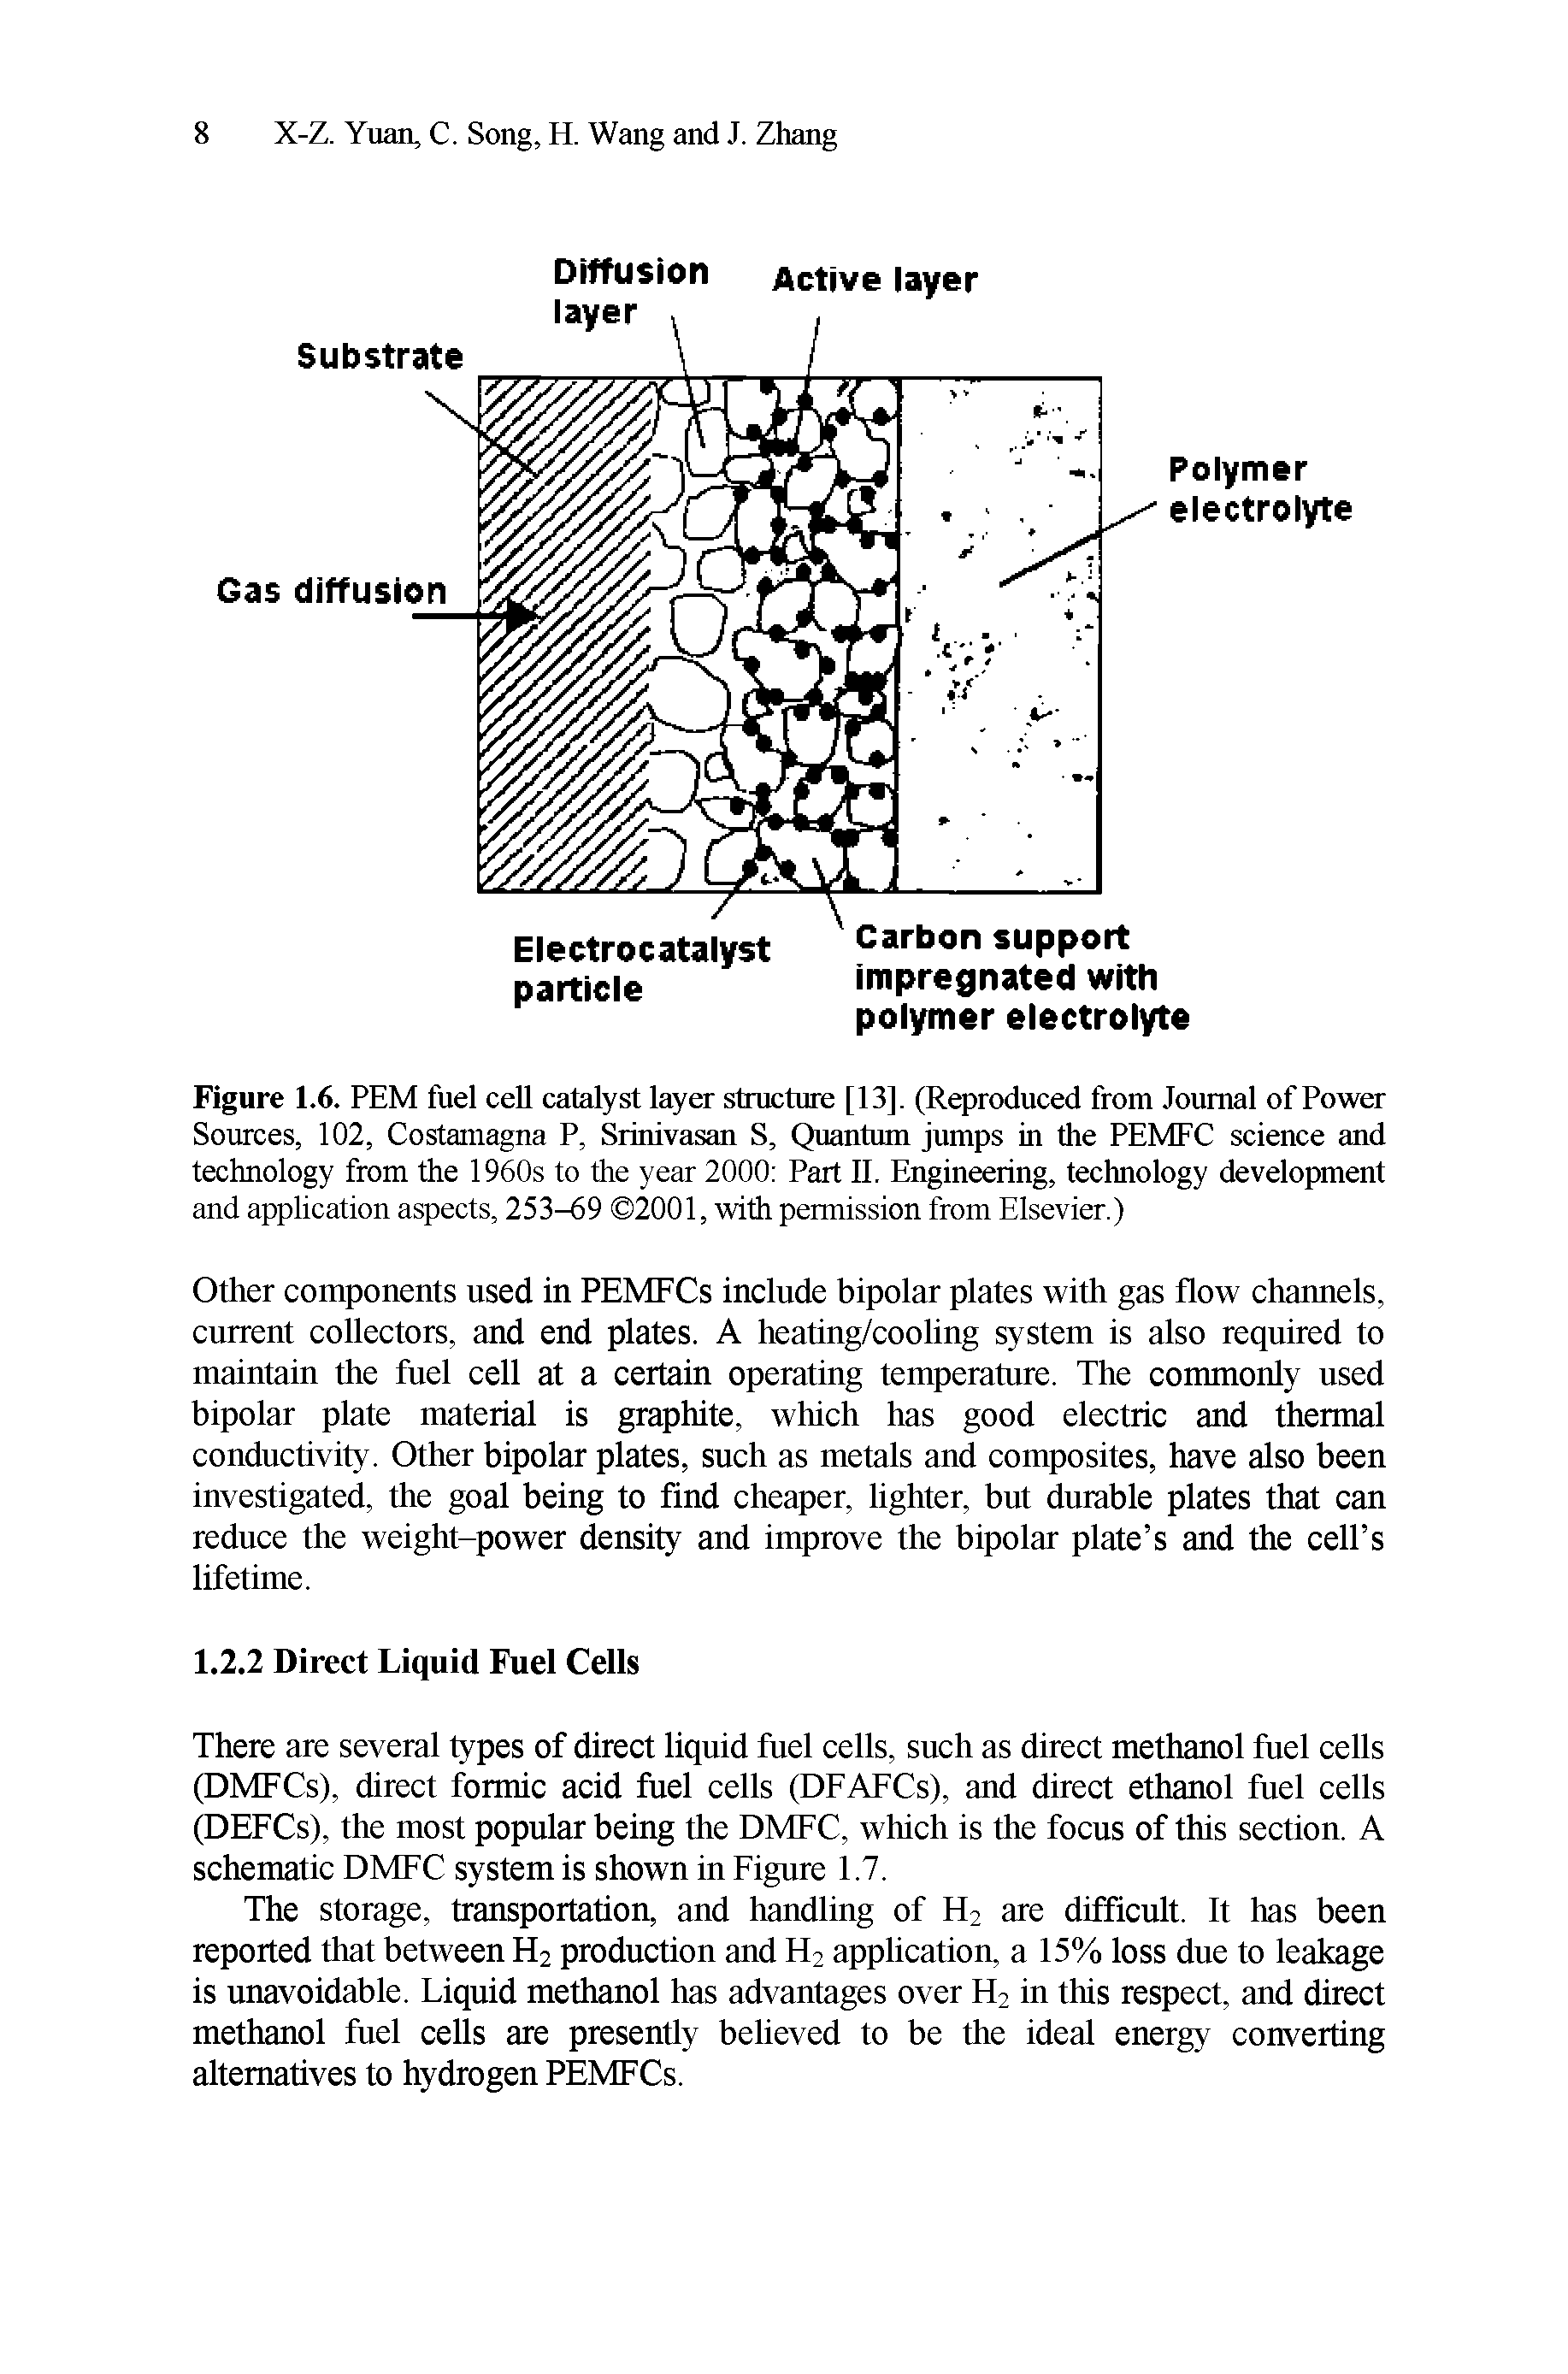 Figure 1.6. PEM fuel cell catalyst layer structure [13]. (Reproduced from Journal of Power Sources, 102, Costamagna P, Srinivasan S, Quantum jumps in the PEMFC science and technology from the 1960s to the year 2000 Part II. Engineering, technology development and application aspects, 253-69 2001, with permission from Elsevier.)...